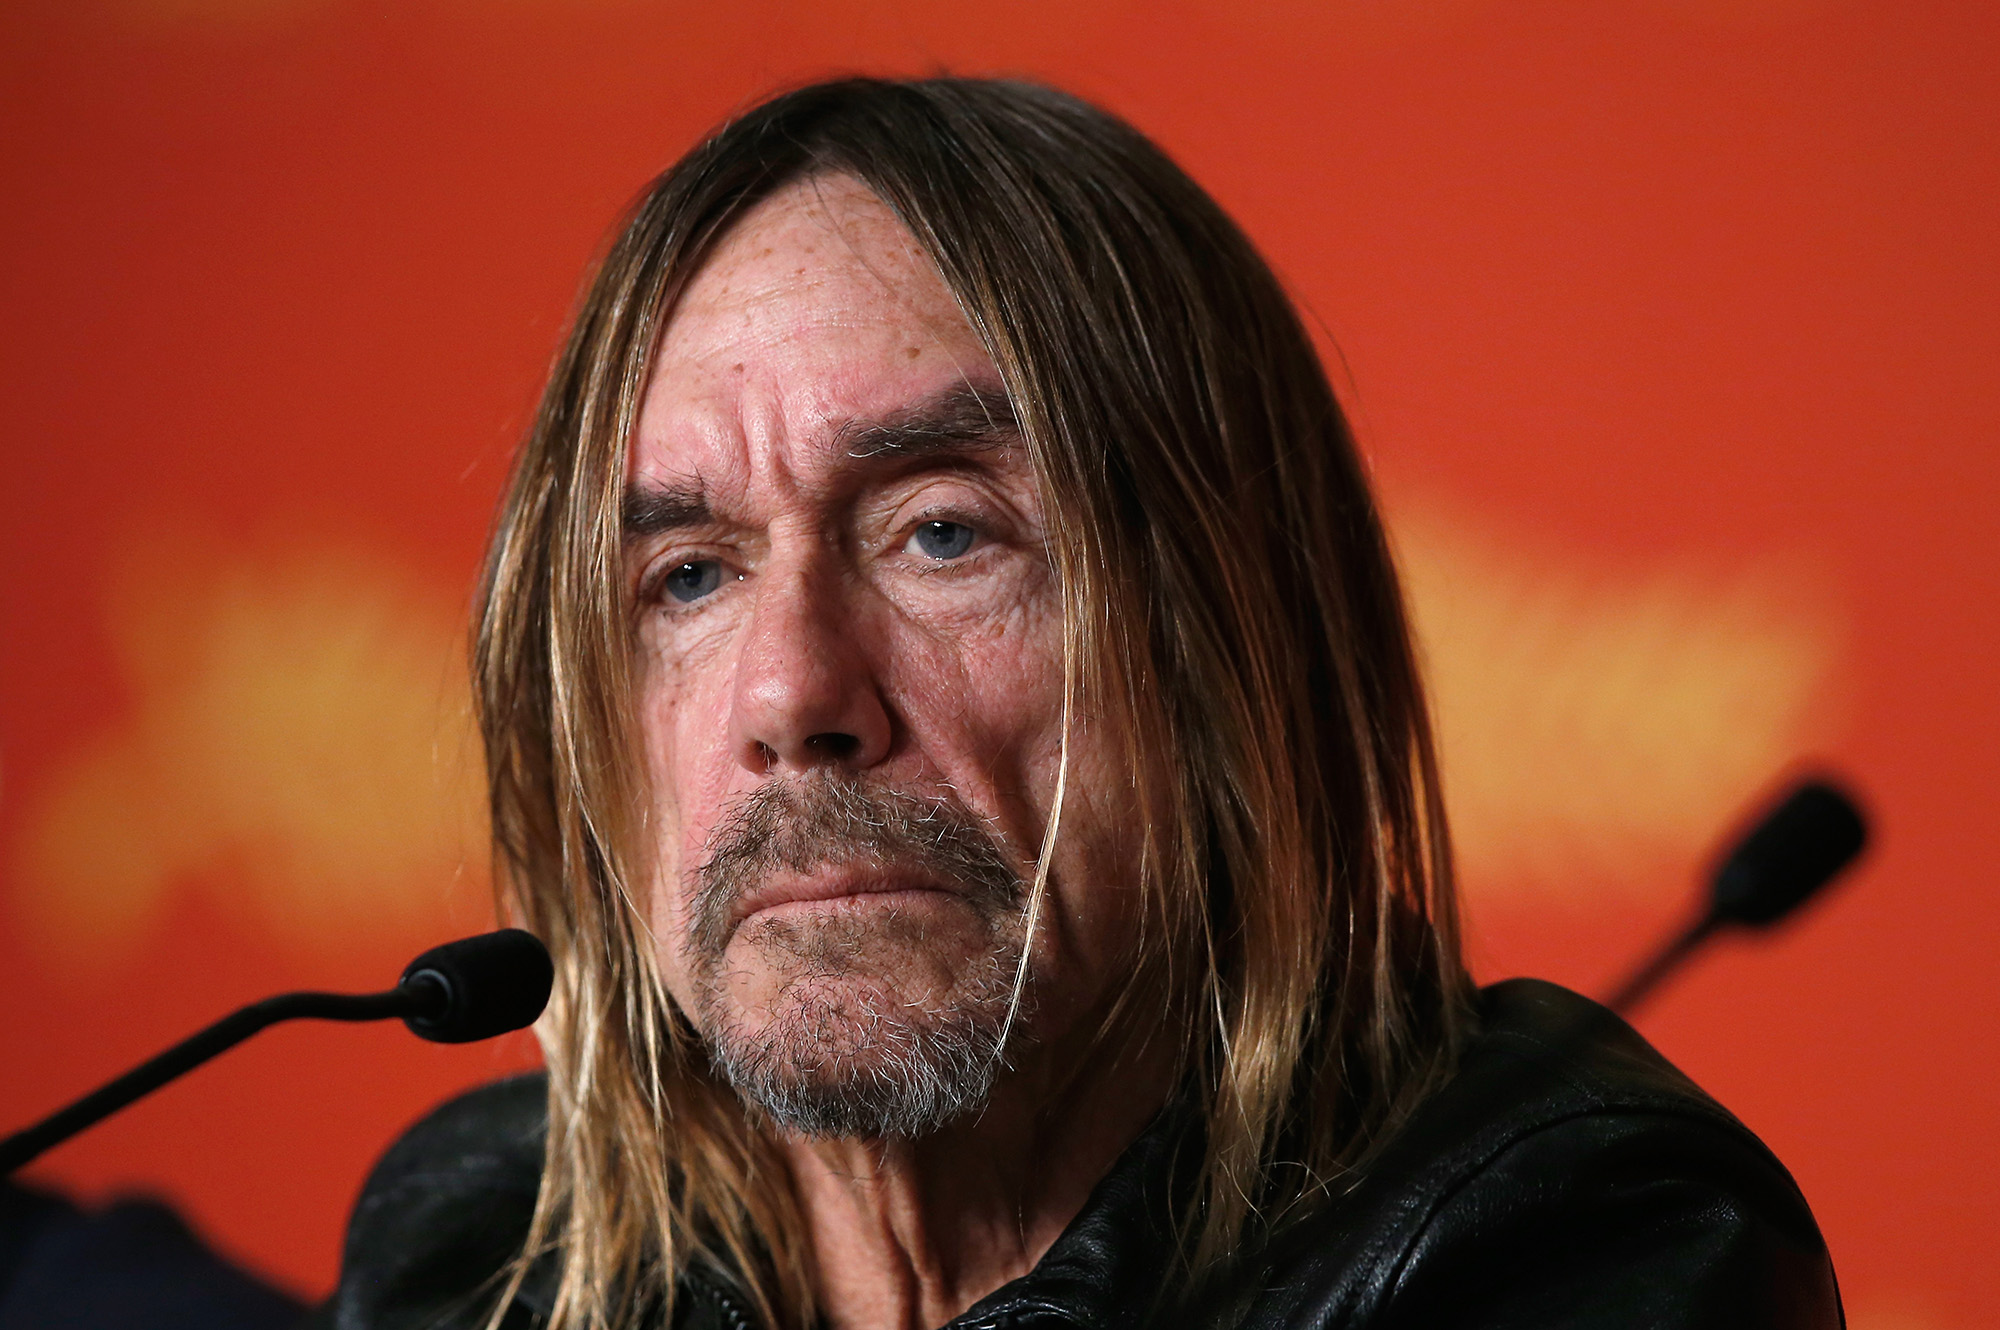 CANNES, FRANCE - MAY 19:  Iggy Pop attends the "Gimme Danger" press conference during the 69th annual Cannes Film Festival at Palais des Festivals (Photo by Pool/Getty Images) (Pool&mdash;Getty Images)